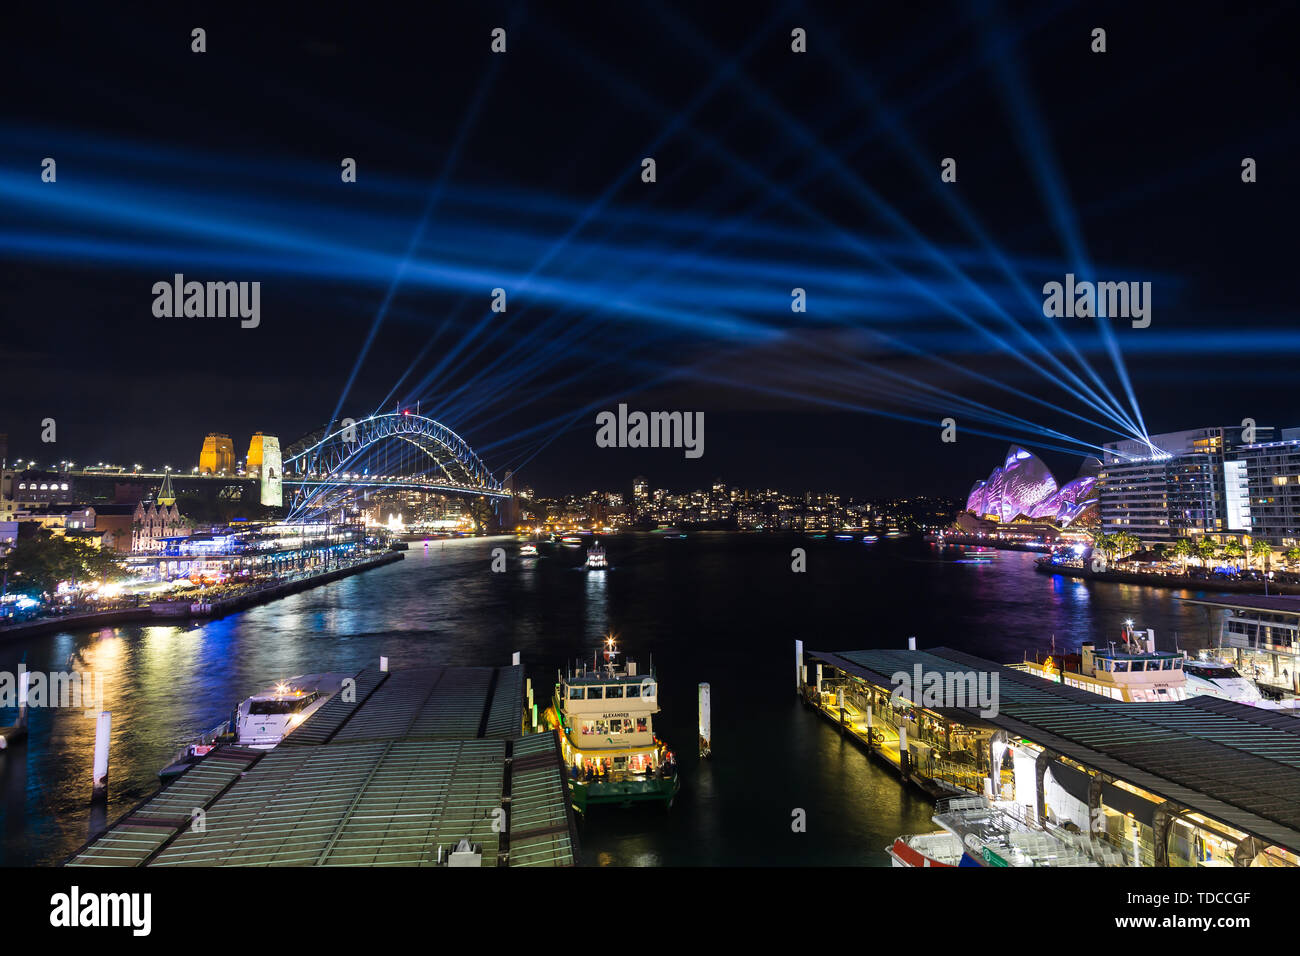 Vivid Sydney. The largest festival of light in the southern hemisphere. Stock Photo